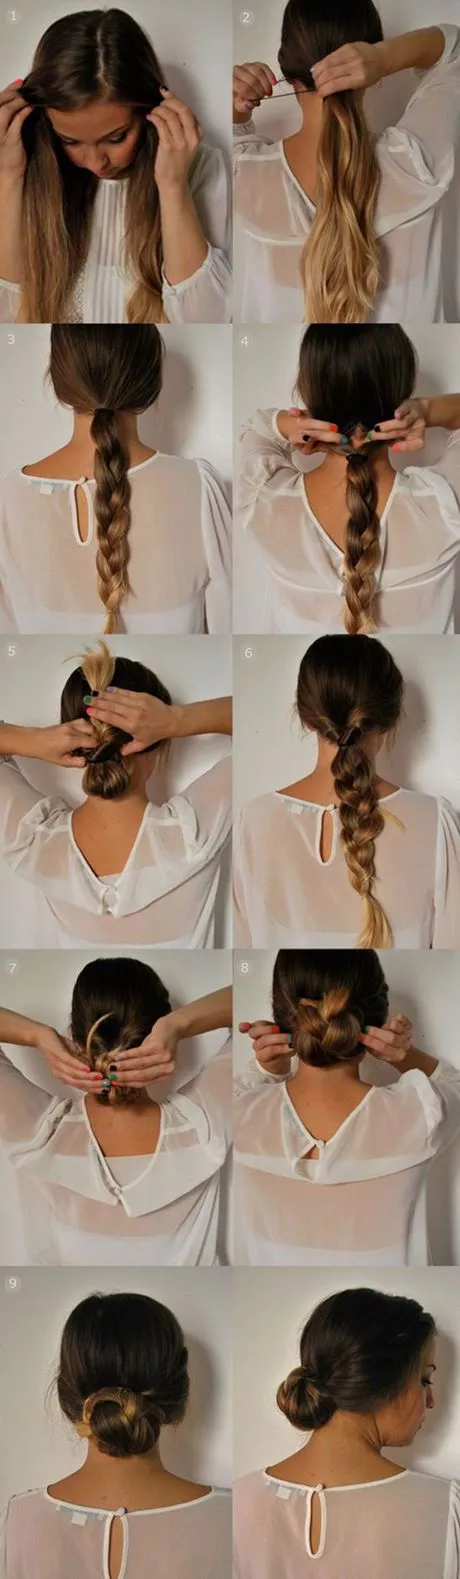 Simple hairstyles for women simple-hairstyles-for-women-24_12-4-4